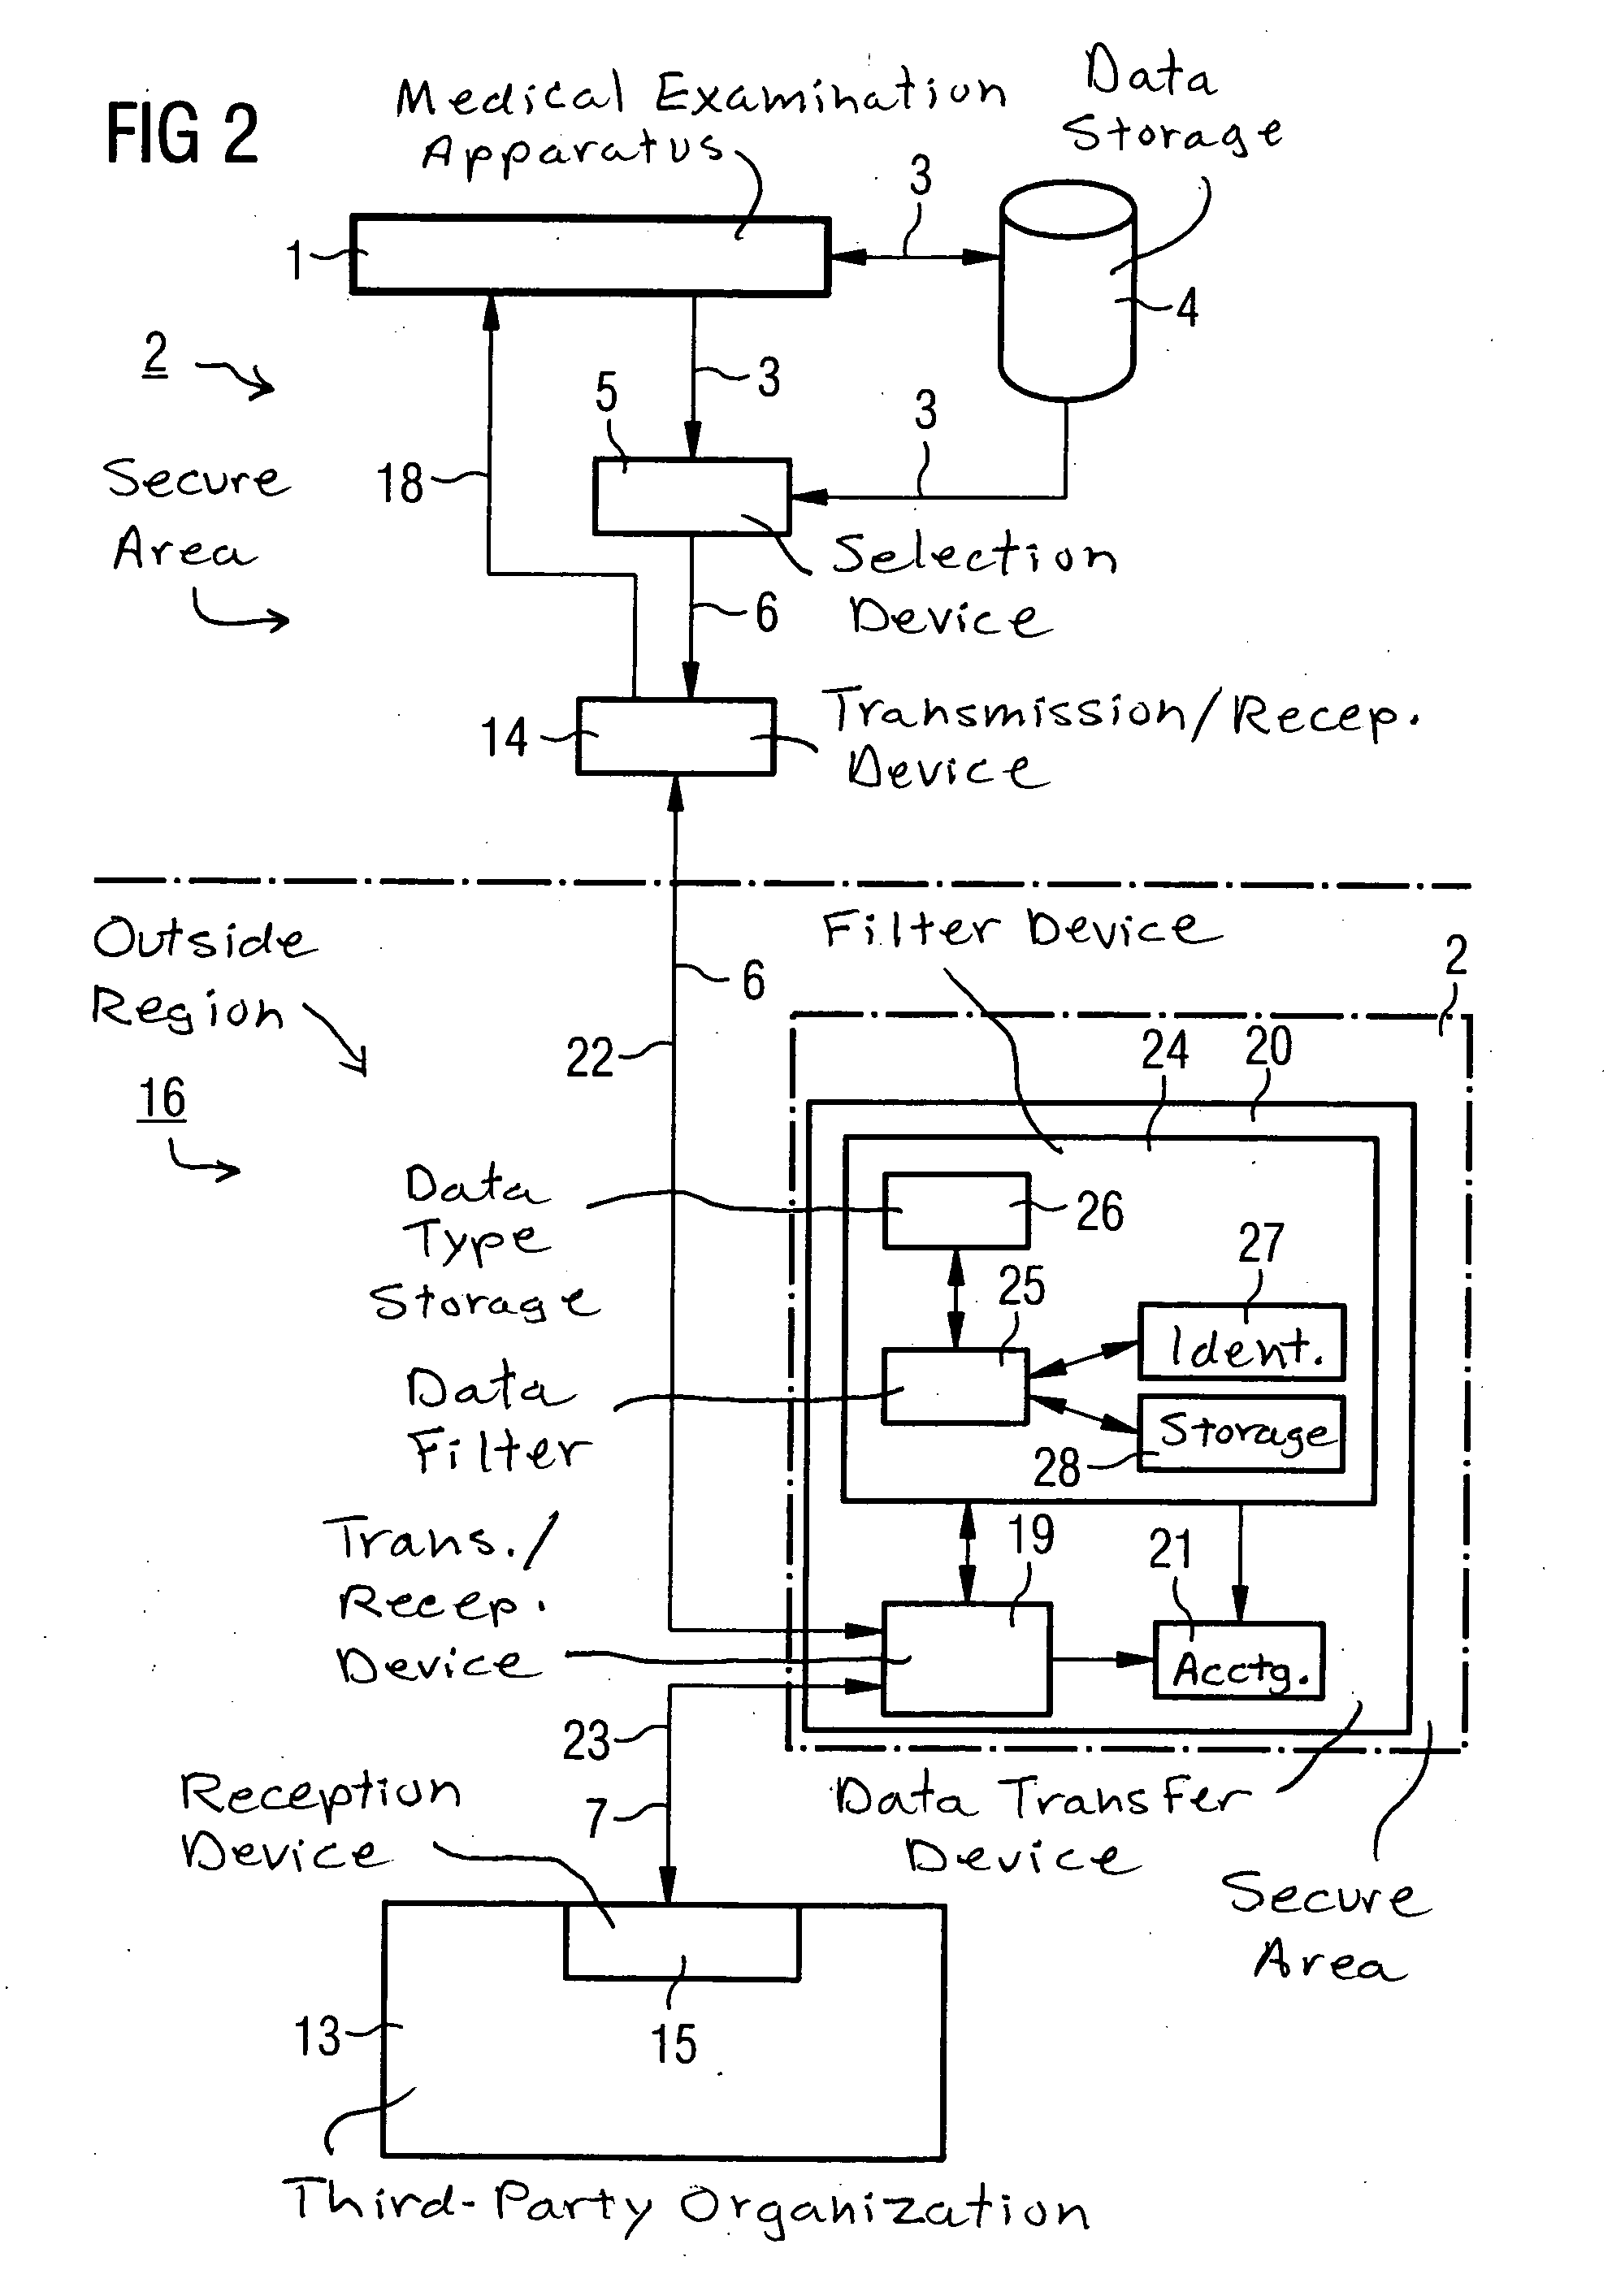 Method and system for transfer of data originating from a medical examination apparatus